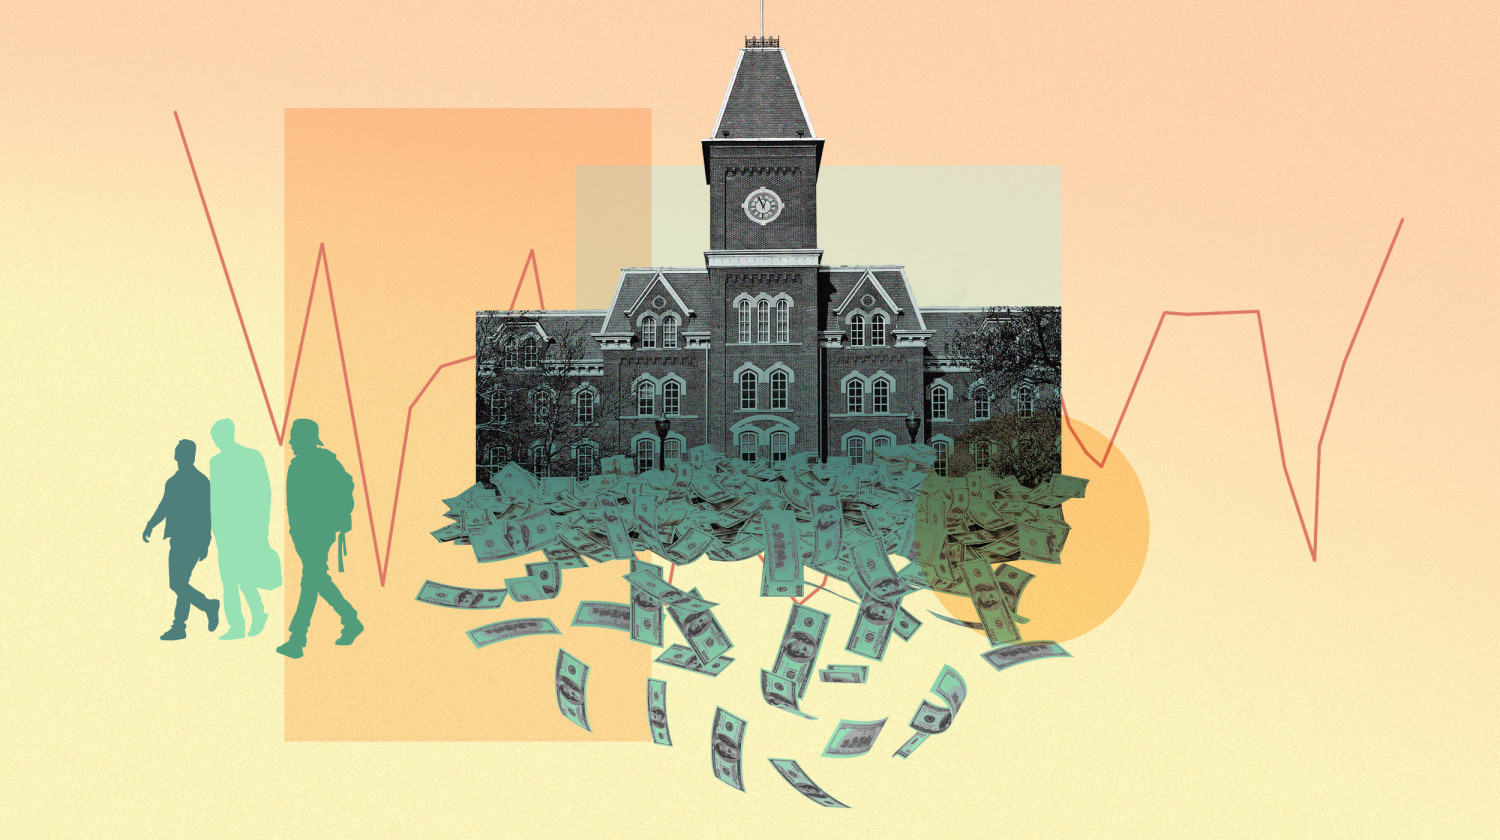 SEARCH YOUR SCHOOL: Put your college through a financial stress test